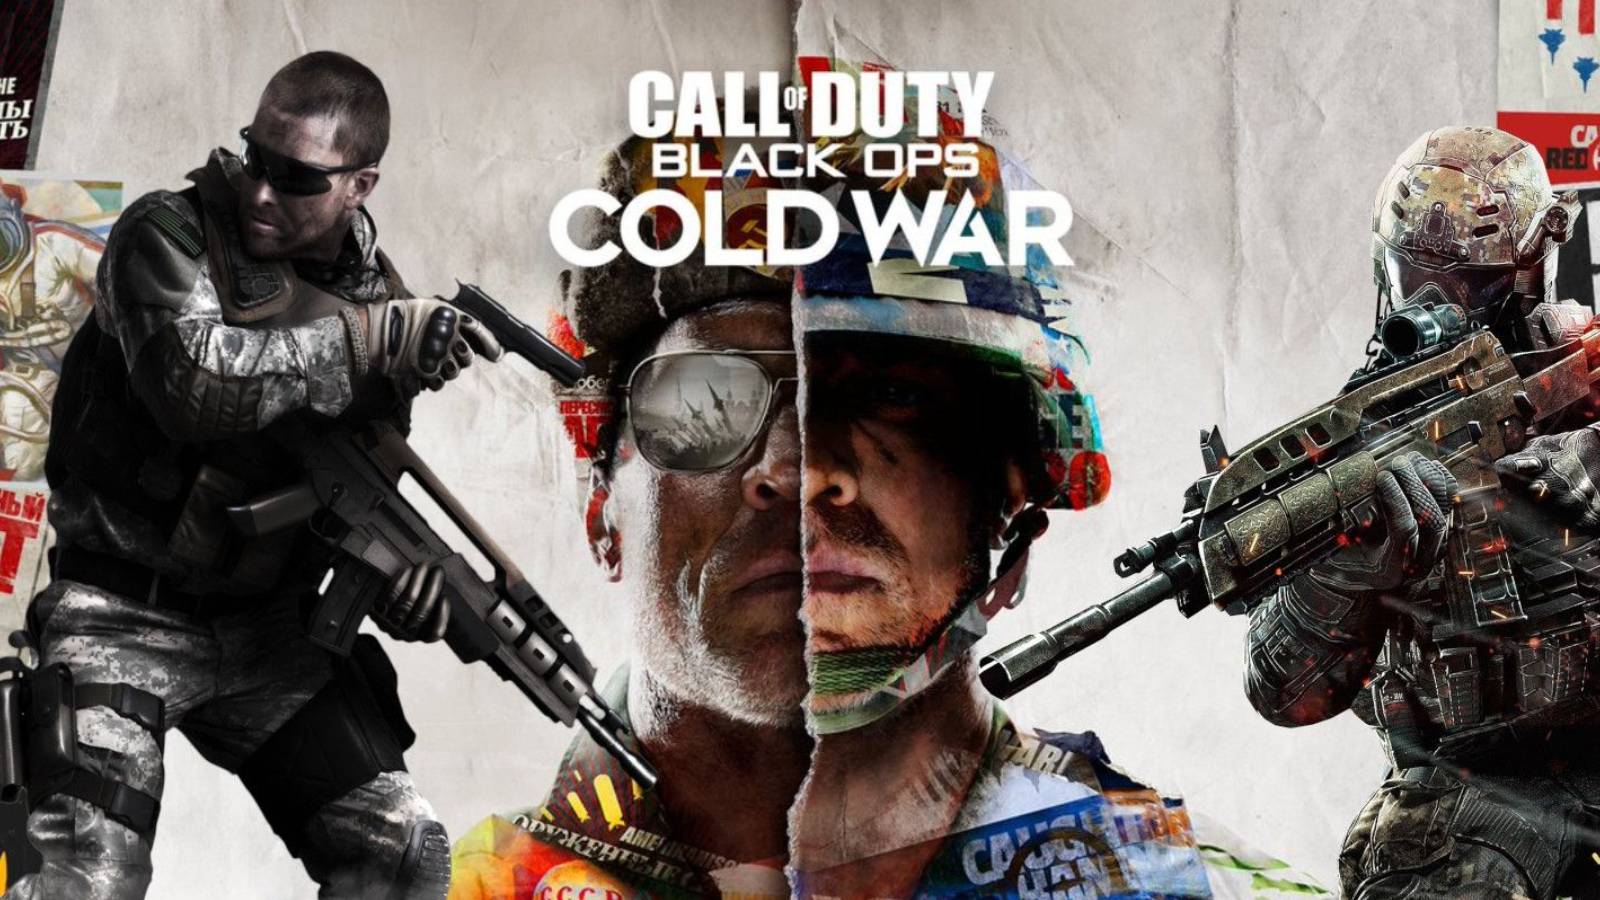 Here's how to watch the Call of Duty: Black Ops Cold War gameplay reveal in Warzone